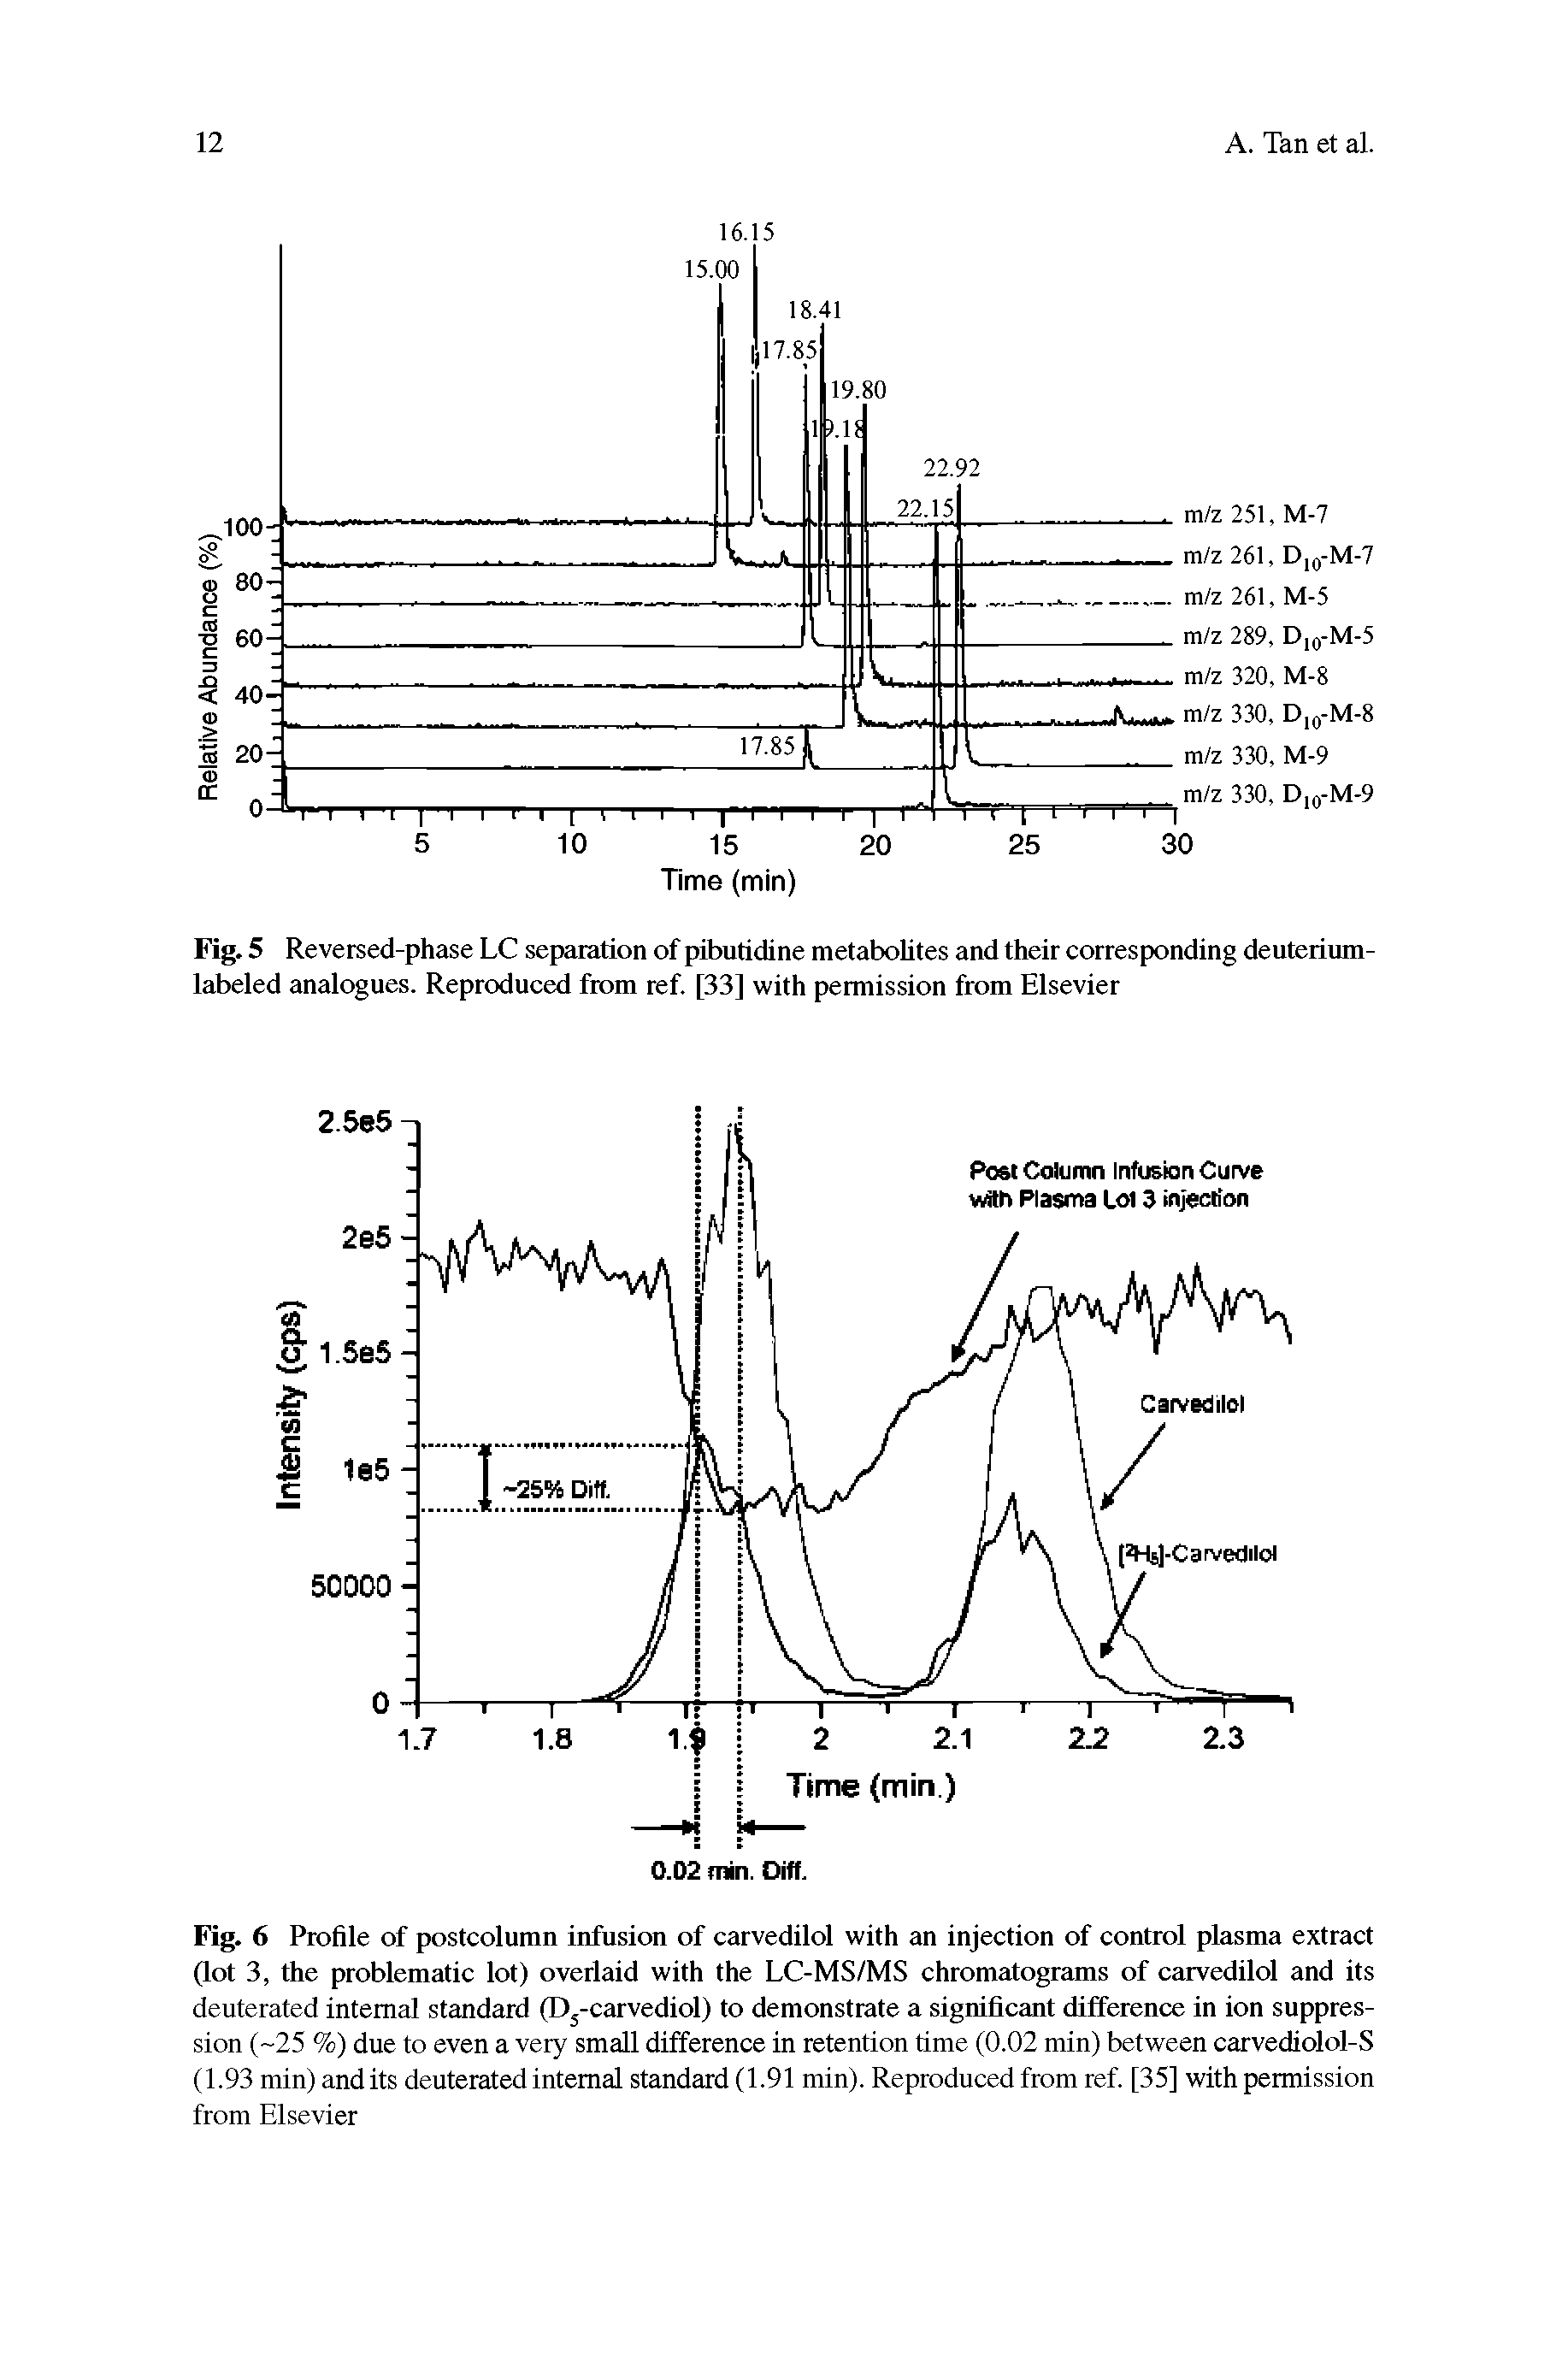 Fig. 6 Profile of postcolumn infusion of carvedilol with an injection of control plasma extract (lot 3, the problematic lot) overlaid with the LC-MS/MS chromatograms of carvedilol and its deuterated internal standard (D5-carvediol) to demonstrate a significant difference in ion suppression (-25 %) due to even a very small difference in retention time (0.02 min) between carvediolol-S (1.93 min) and its deuterated internal standard (1.91 min). Reproduced from ref. [35] with permission from Elsevier...